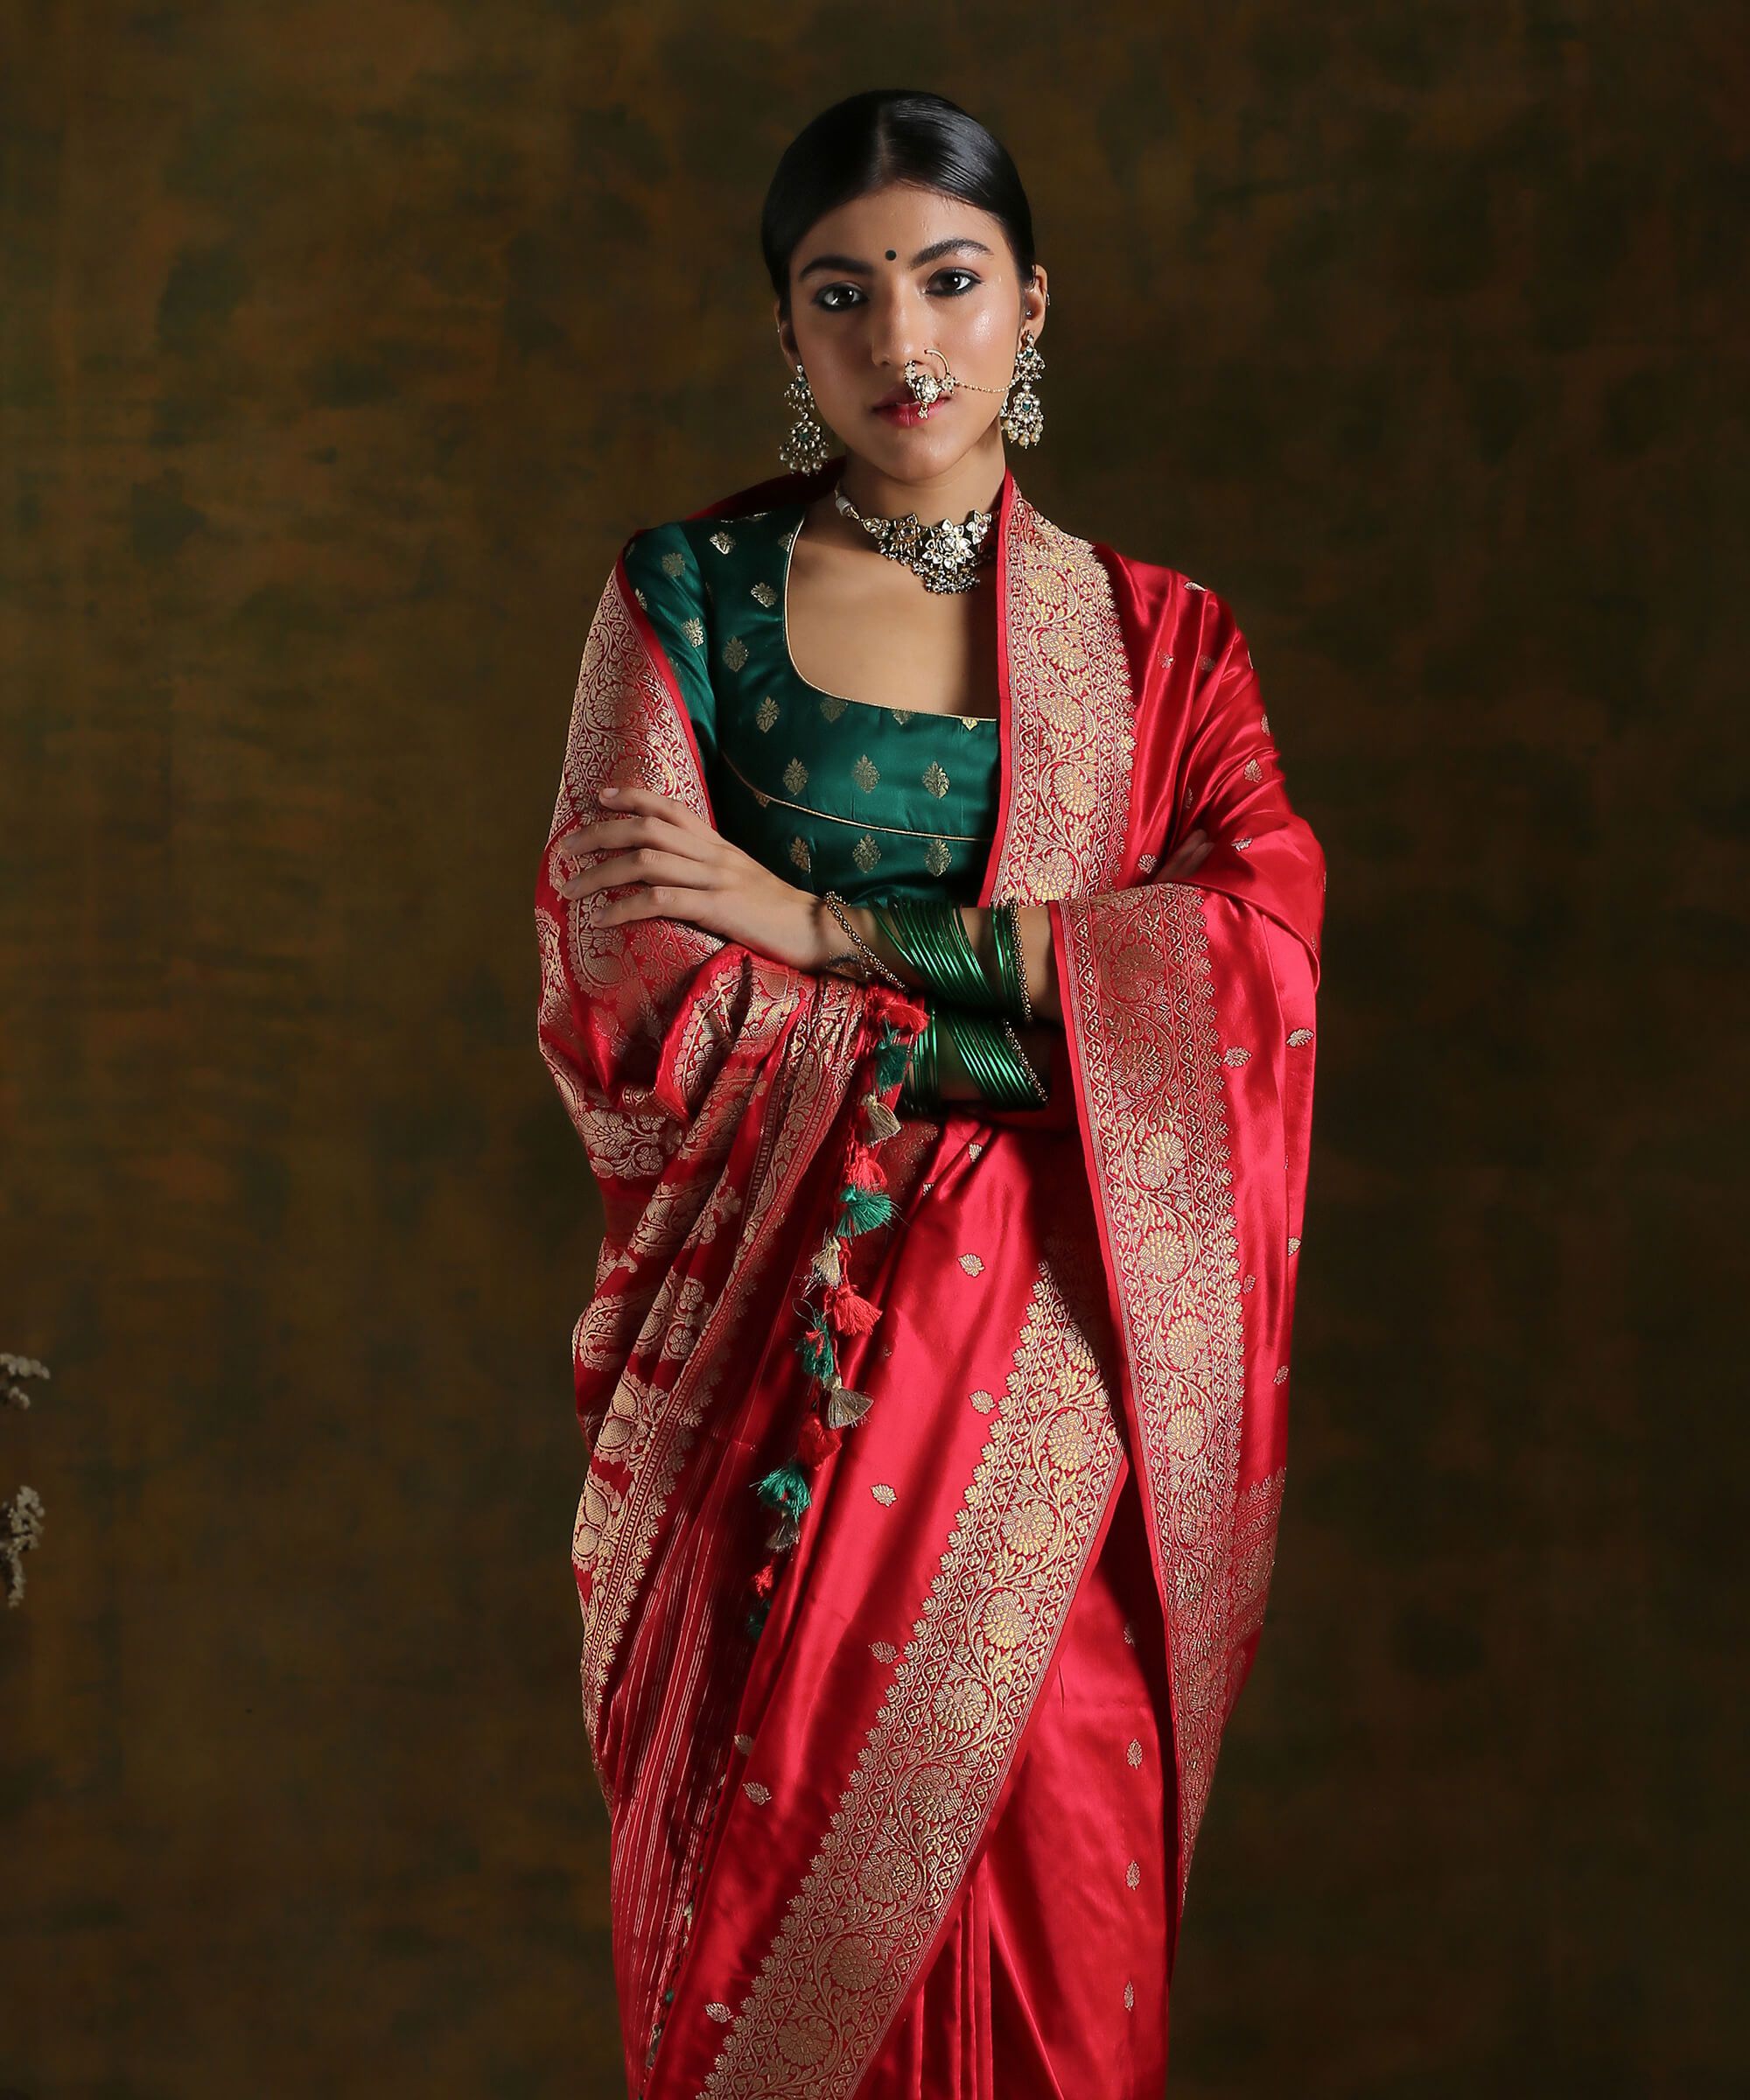 bottle-green-saree -in-pure-handloom-silk-with-red-woven-border-and-two-toned-buttis-along-with-unstitched- blouse-online-kalki-fashion-v002520525y-sg69480_2_ - Kalki Fashion Blog –  Latest Fashion Trends, Bridal Fashion, Style Tips, News and Many More